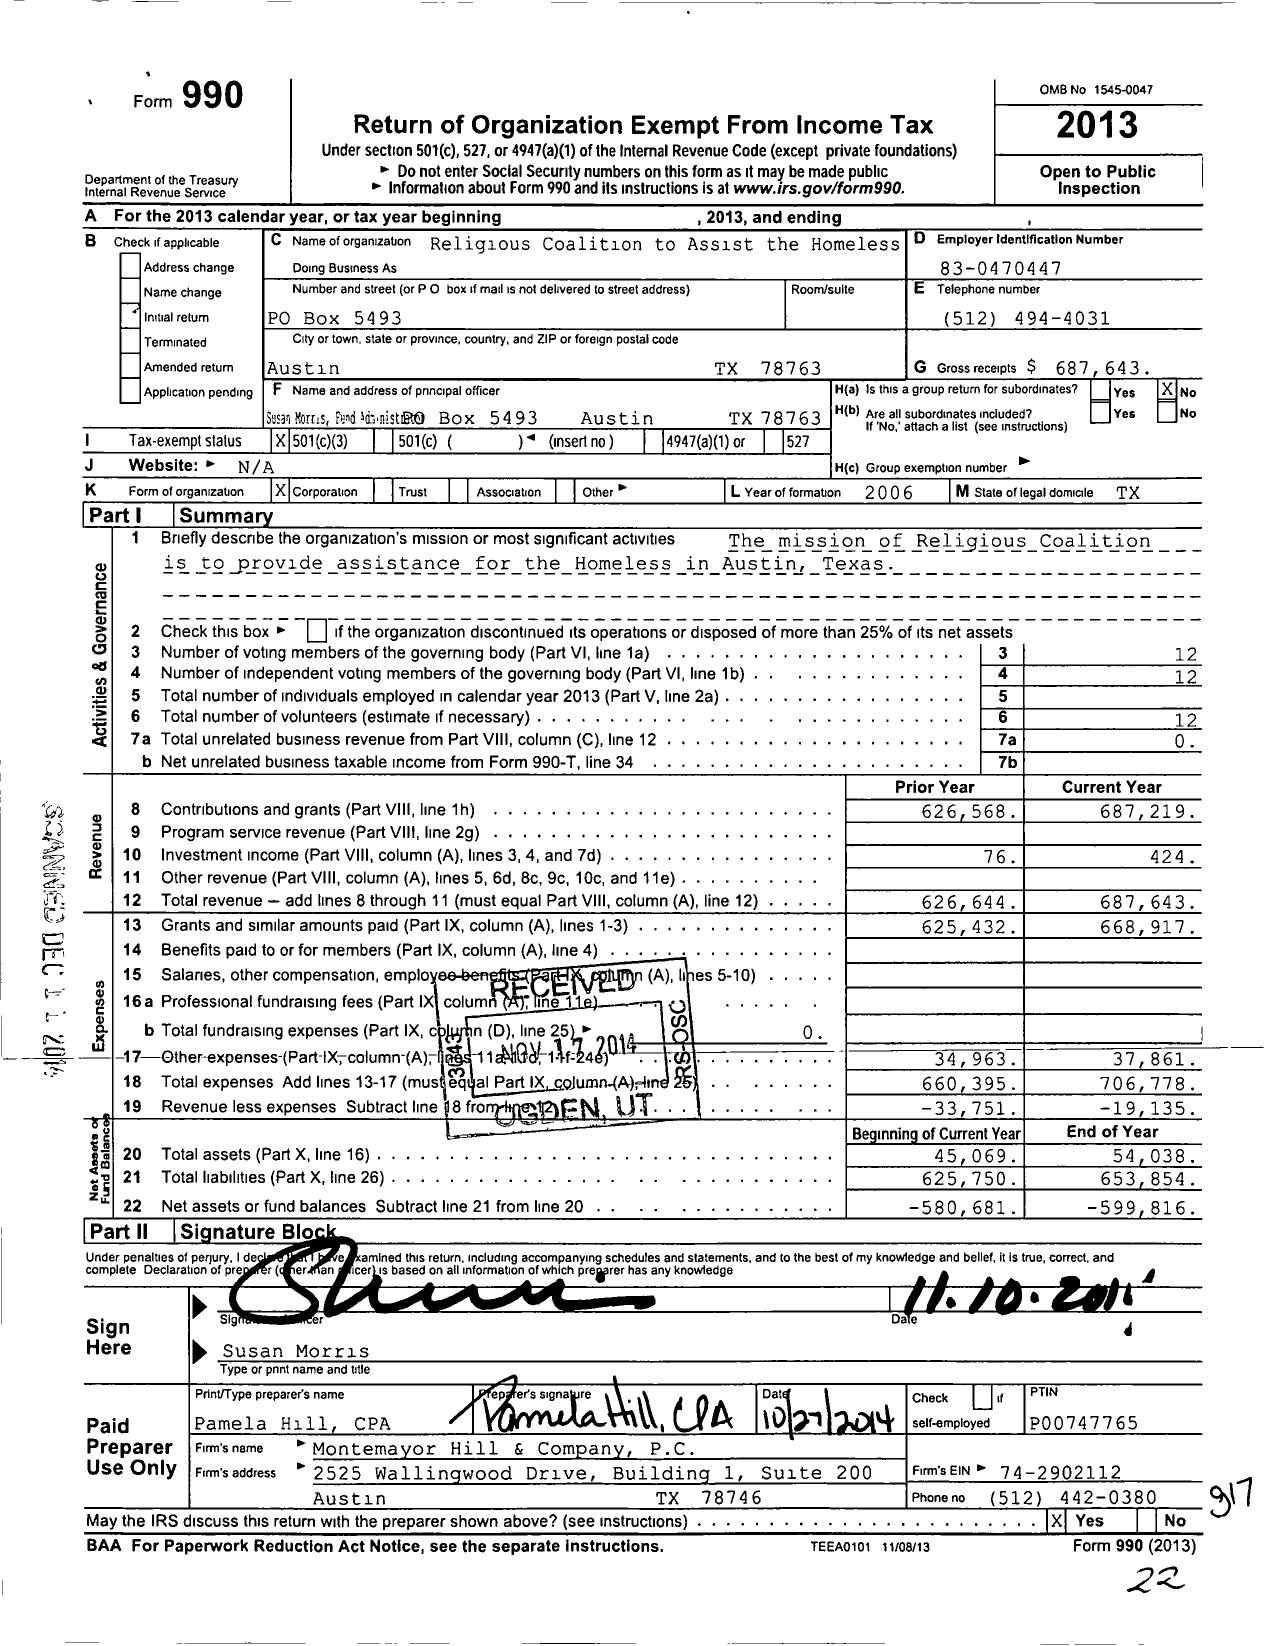 Image of first page of 2013 Form 990 for Religious Coalition to Assist the Homeless (RCAH)